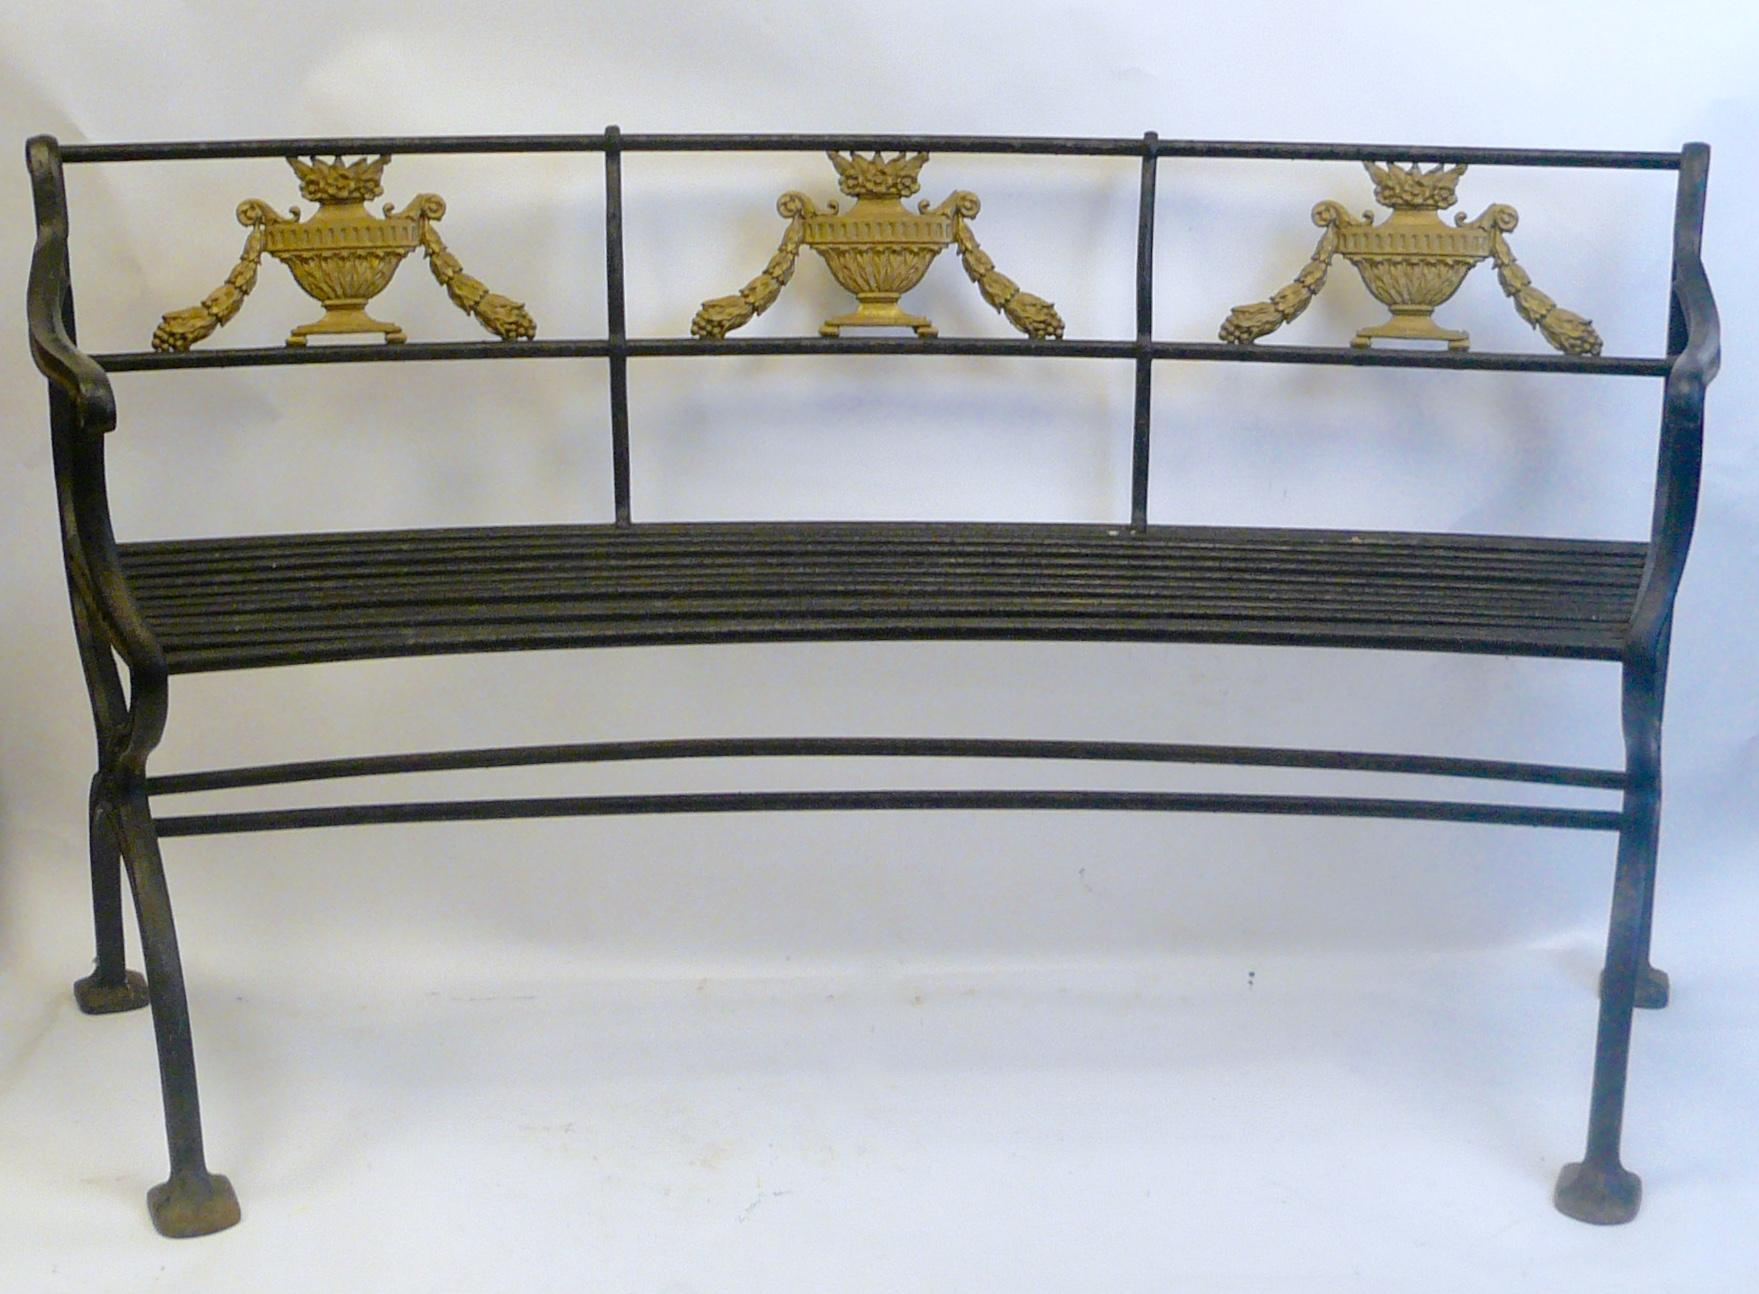 This handsome pair of slightly bow shaped iron garden benches are signed W. A. Snow, Boston. The backs feature neoclassical style lidded urns and swags.